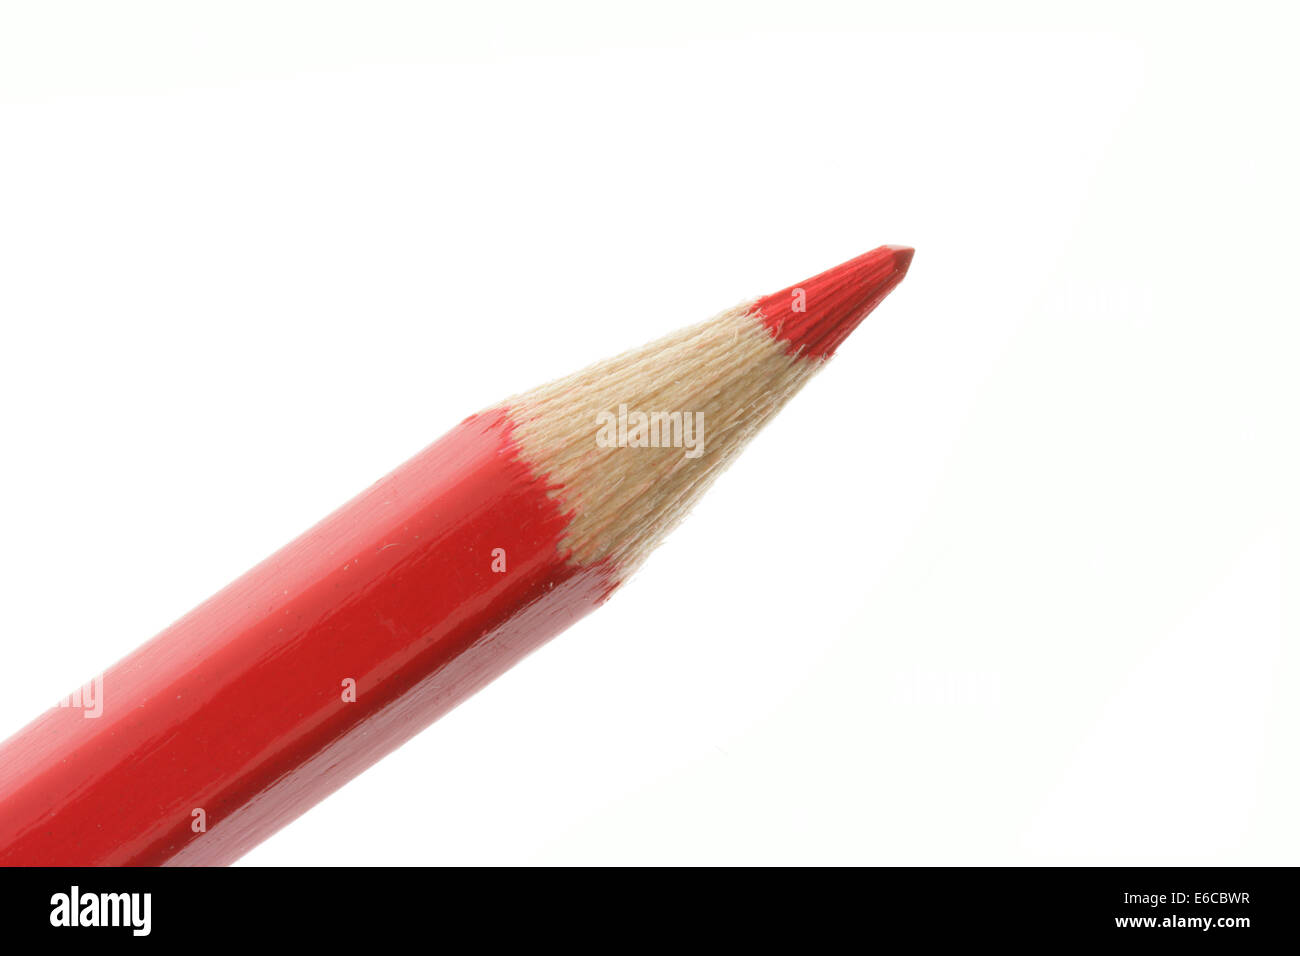 Red pencil close-up isolated over white background Stock Photo